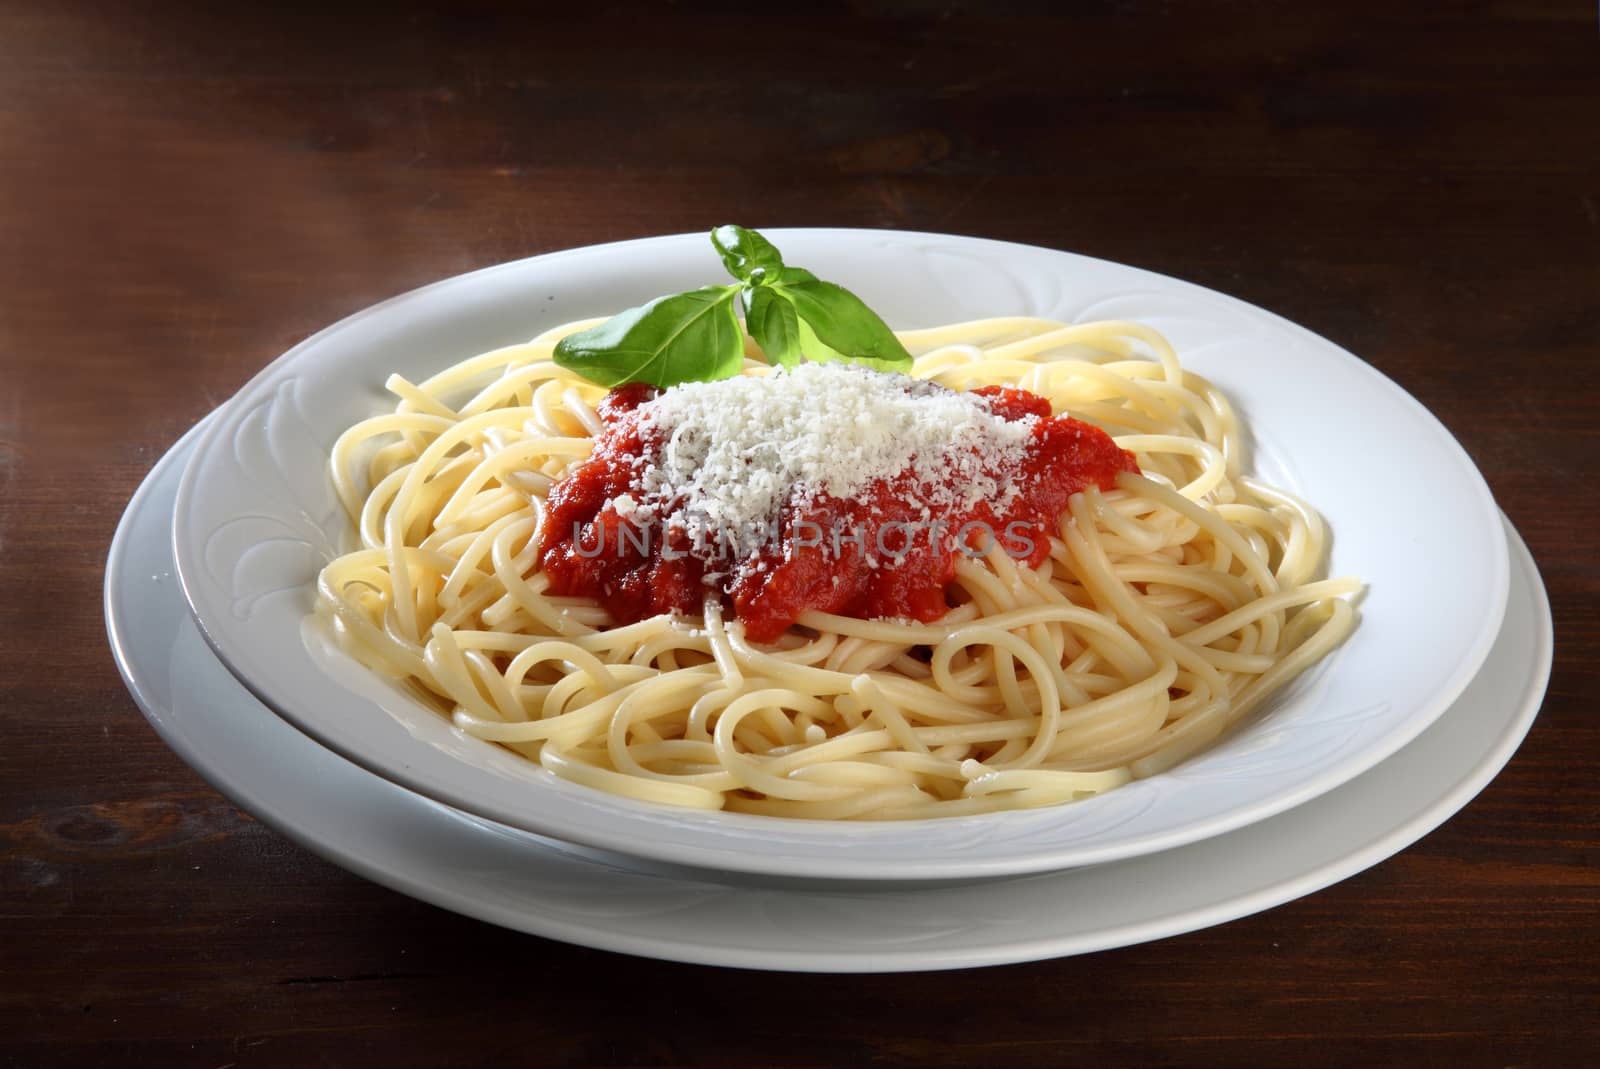 Italian dish of spaghetti with tomato and basil on a wooden table